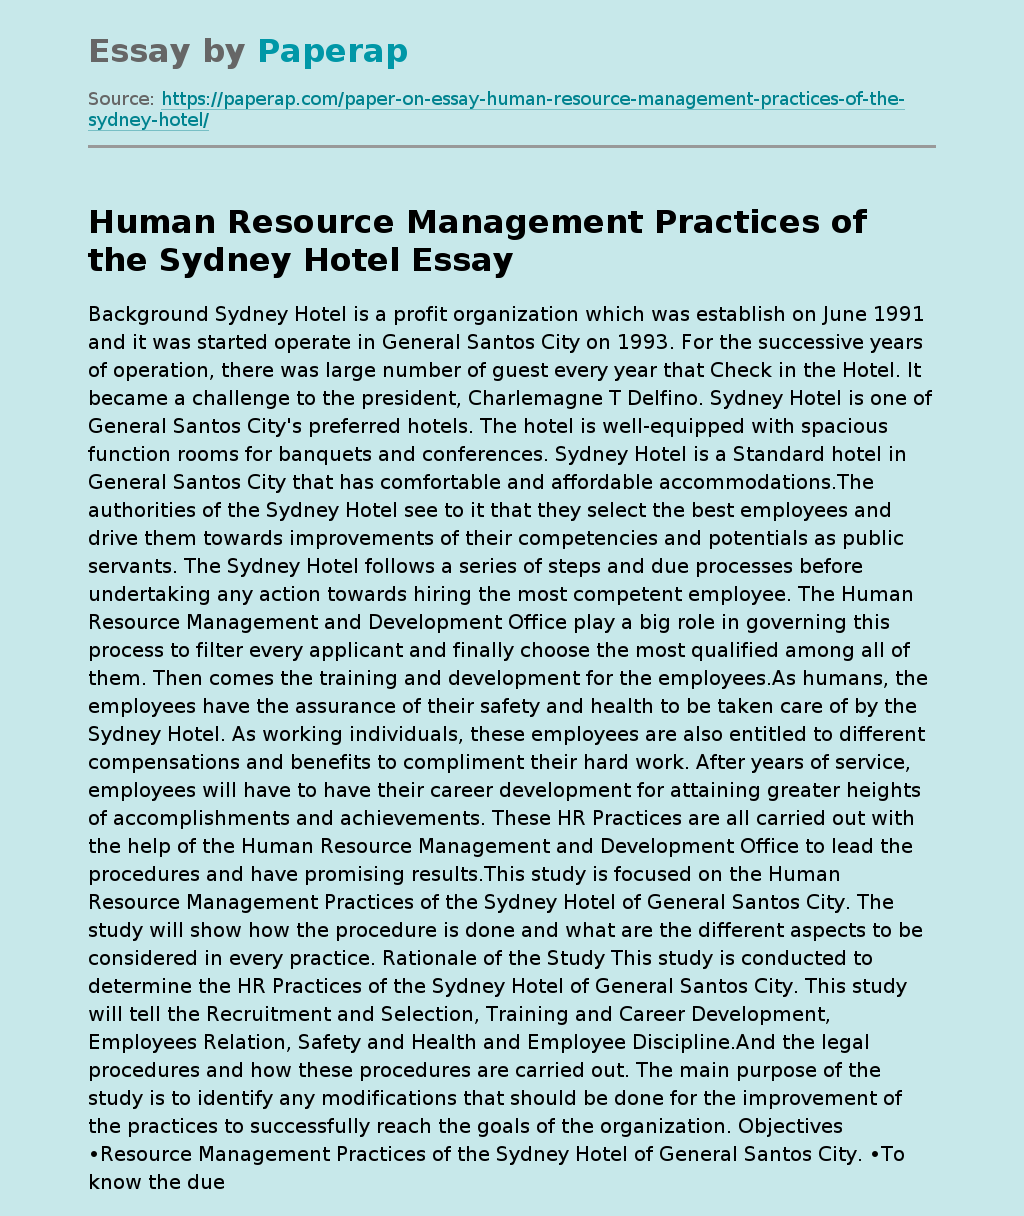 Human Resource Management Practices of the Sydney Hotel